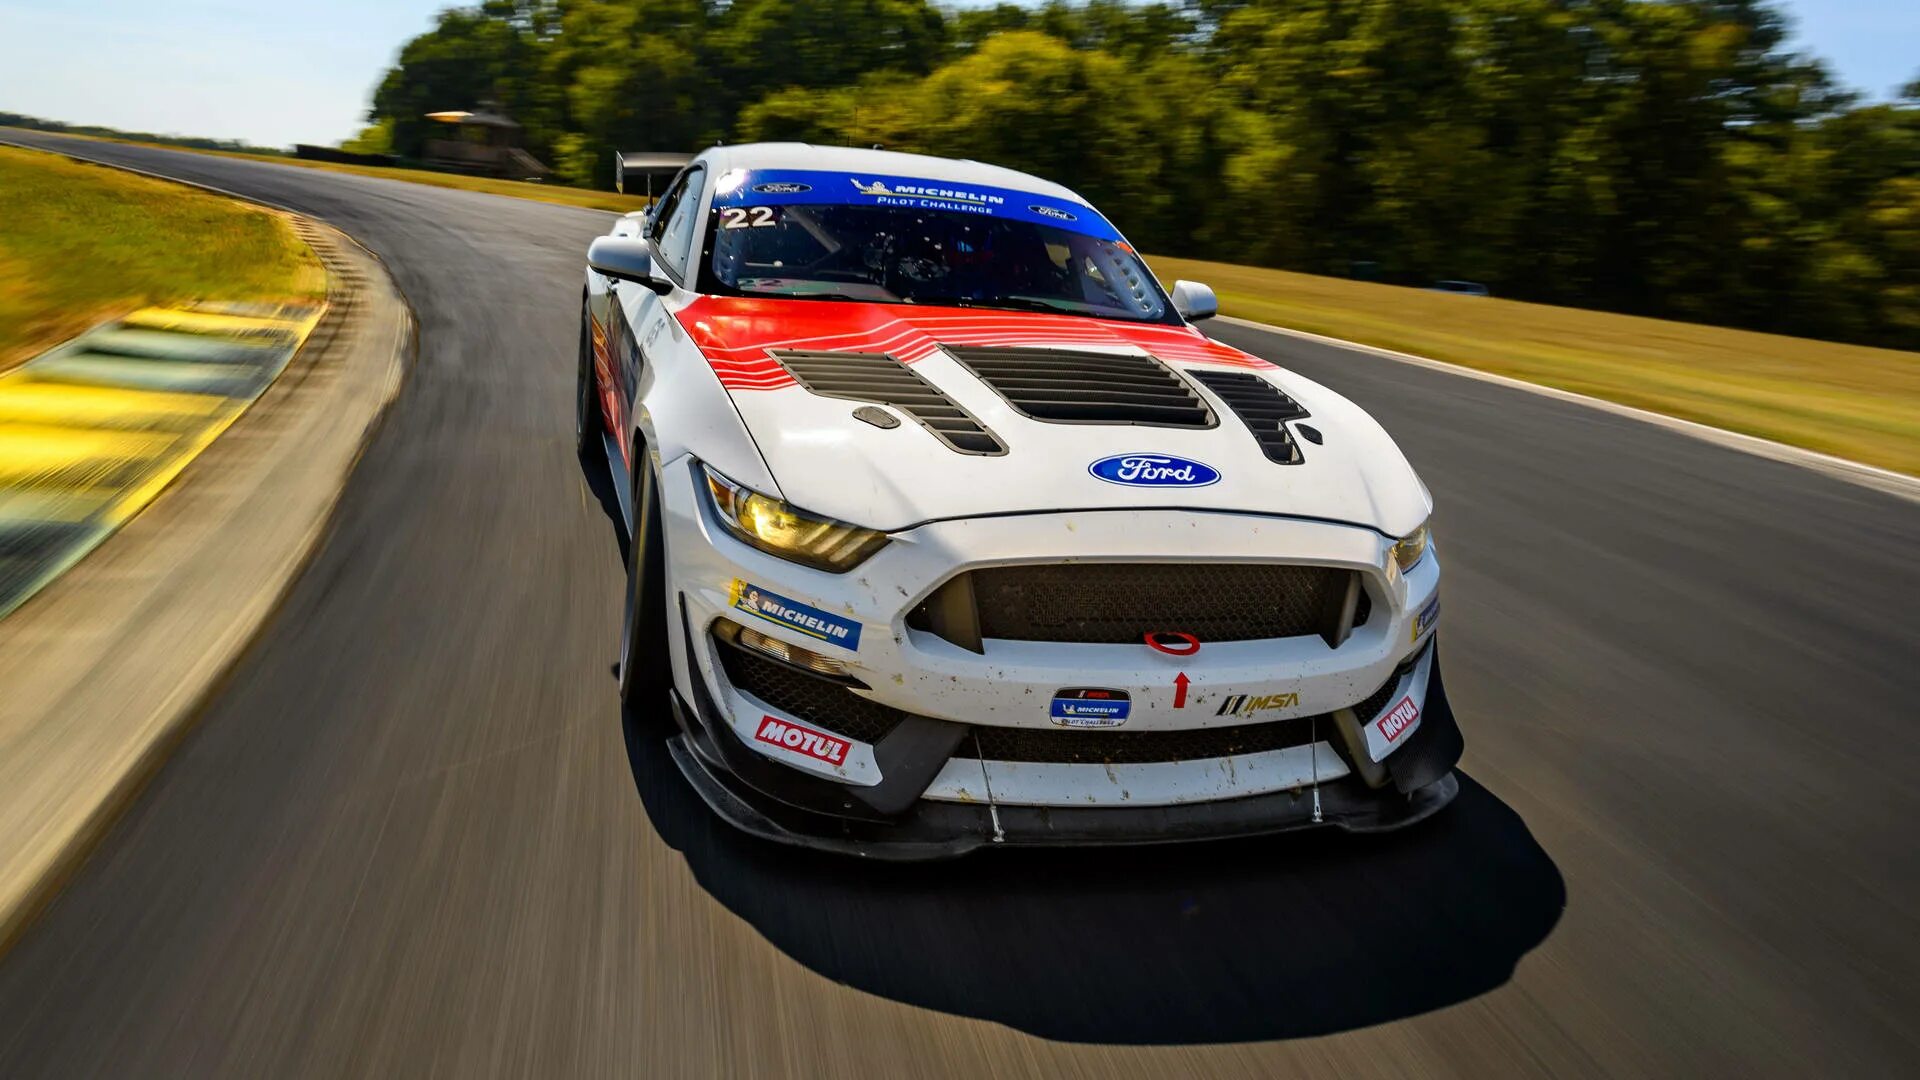 Форд рейсинг. Ford Mustang gt4. Ford Mustang gt4 Race car. Форд Мустанг gt гоночная. Ford Mustang gt3 Racecar.